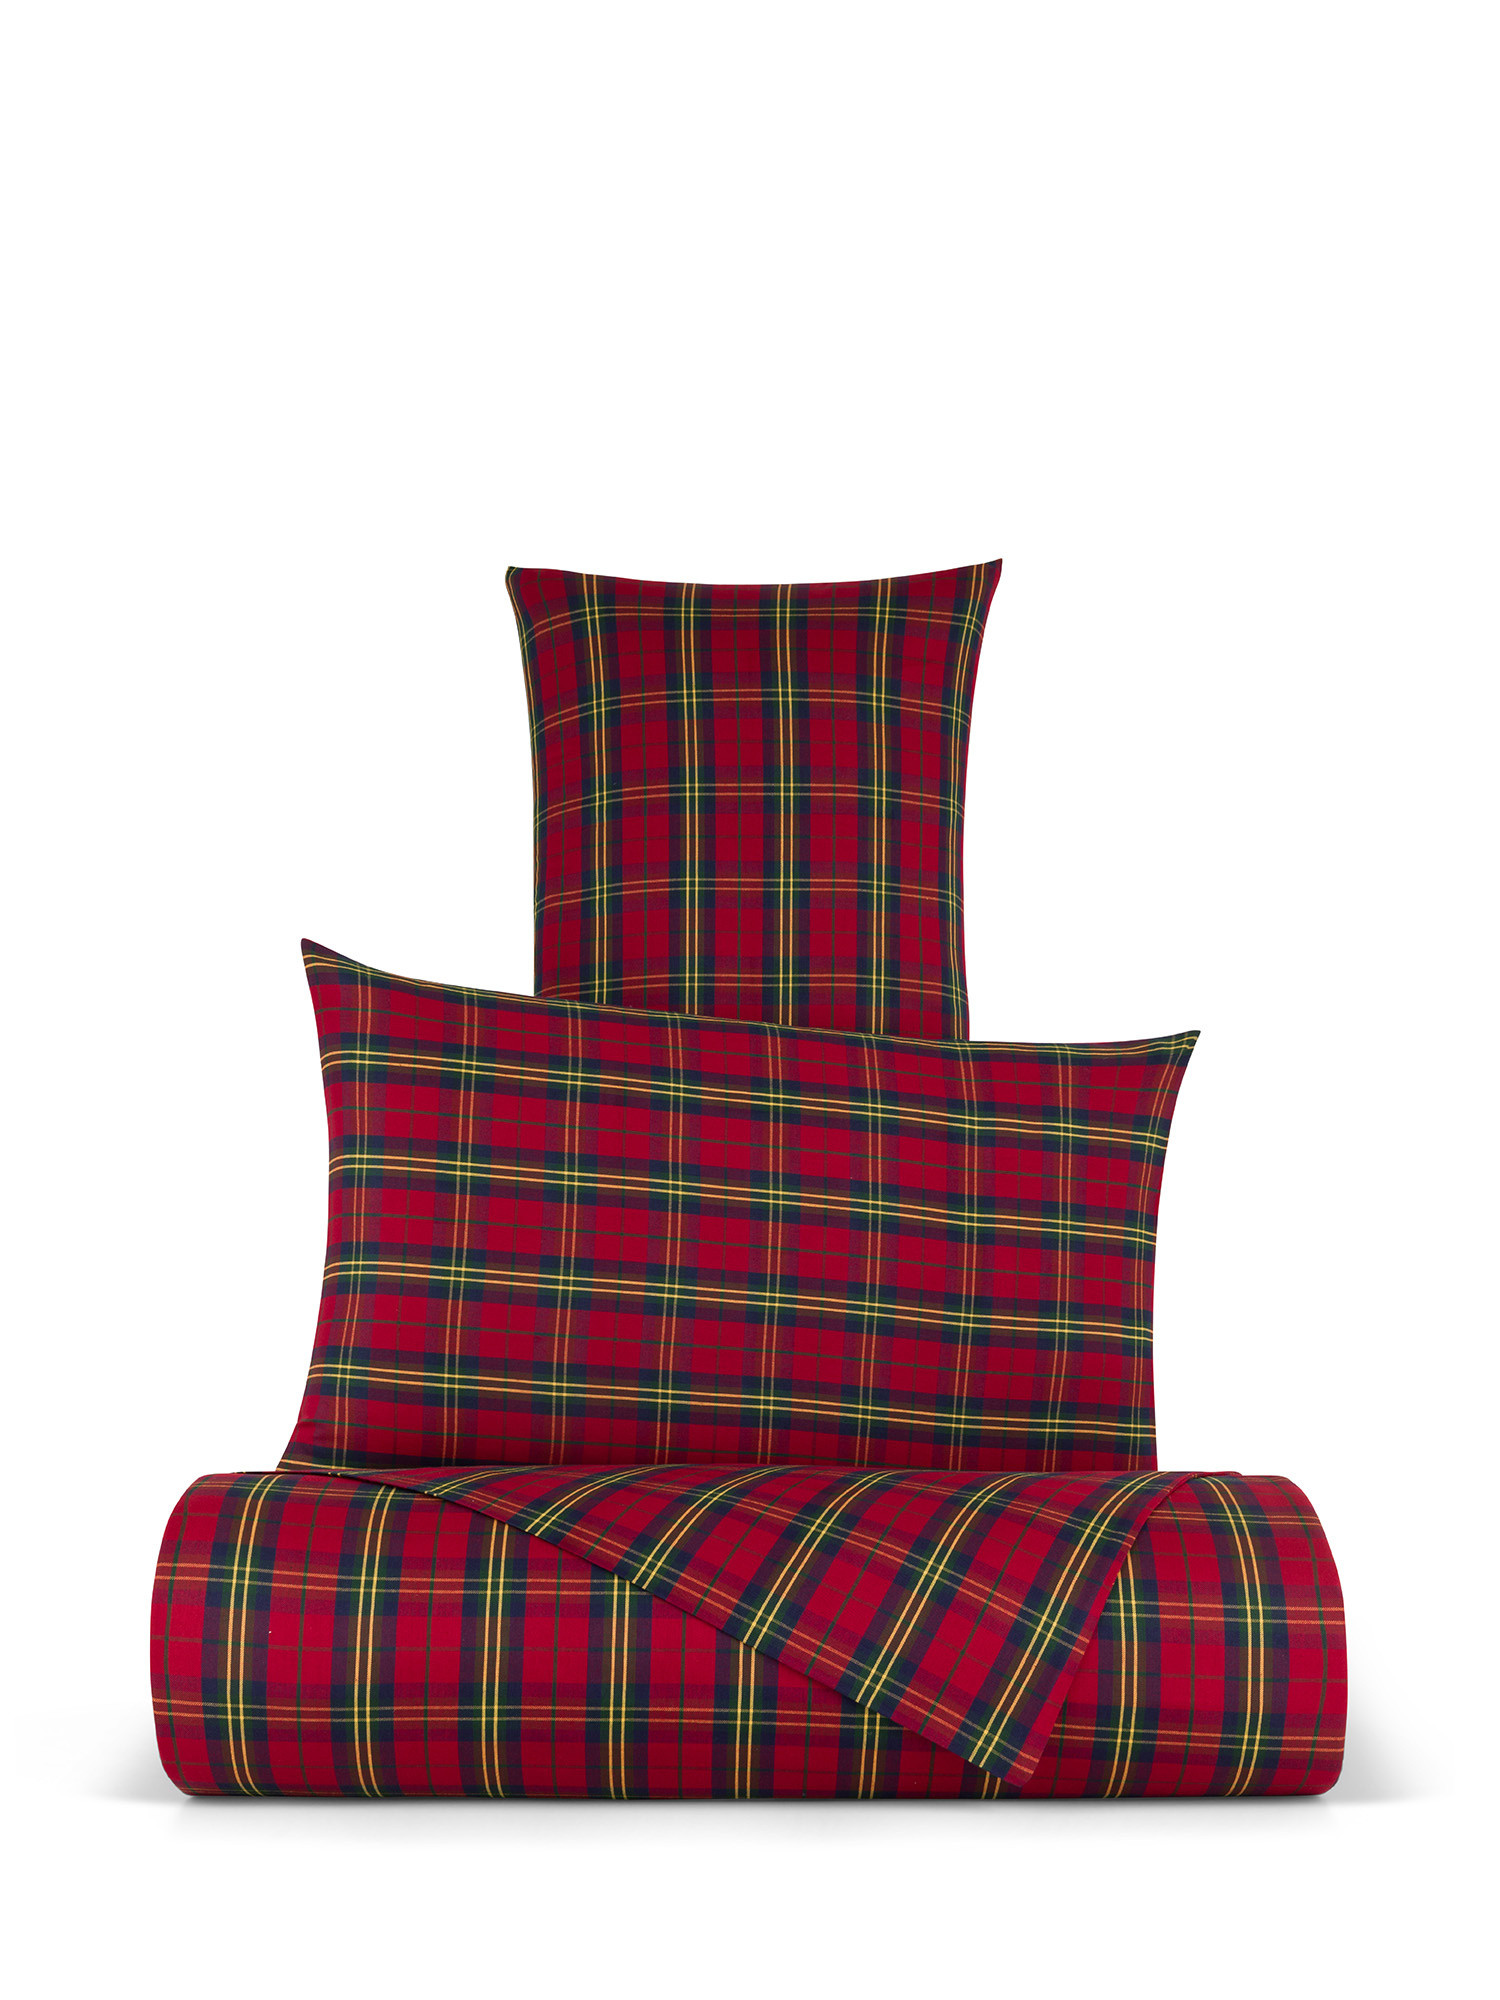 Cotton flannelette tartan pillowcase, Red, large image number 1